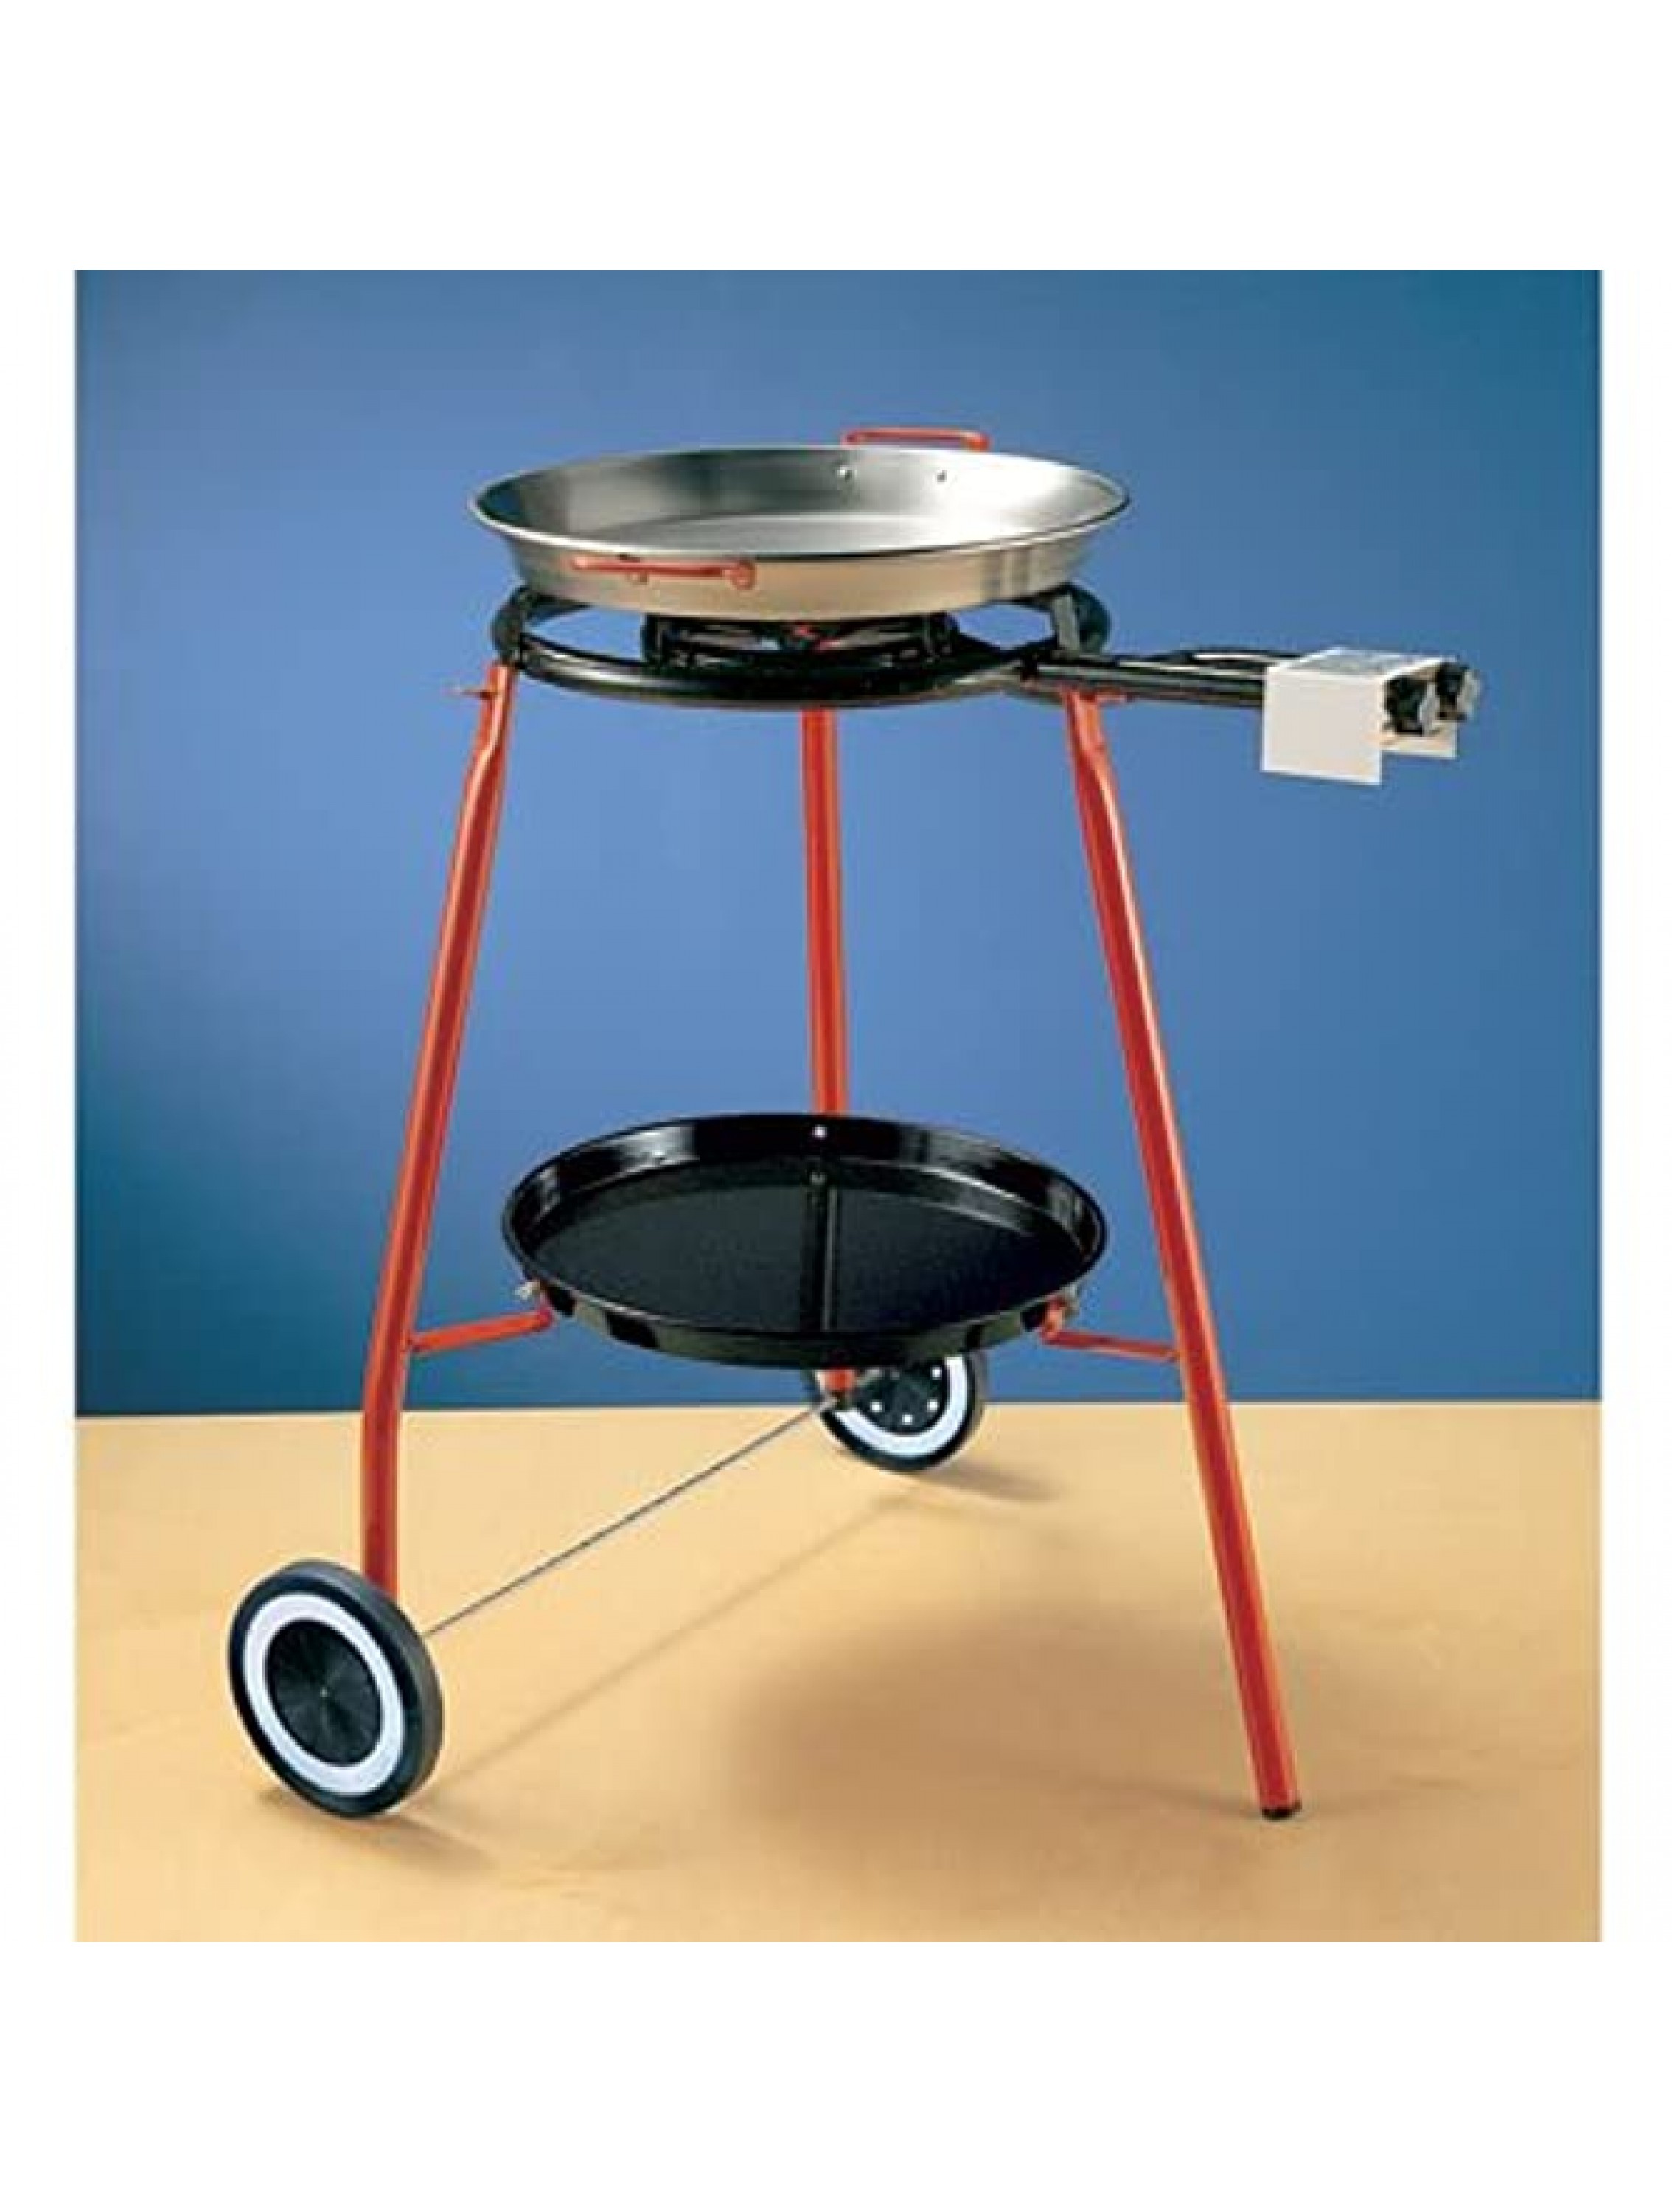 Burner with rolling stand and 42cm Paella Pan - BNG3HRL6A